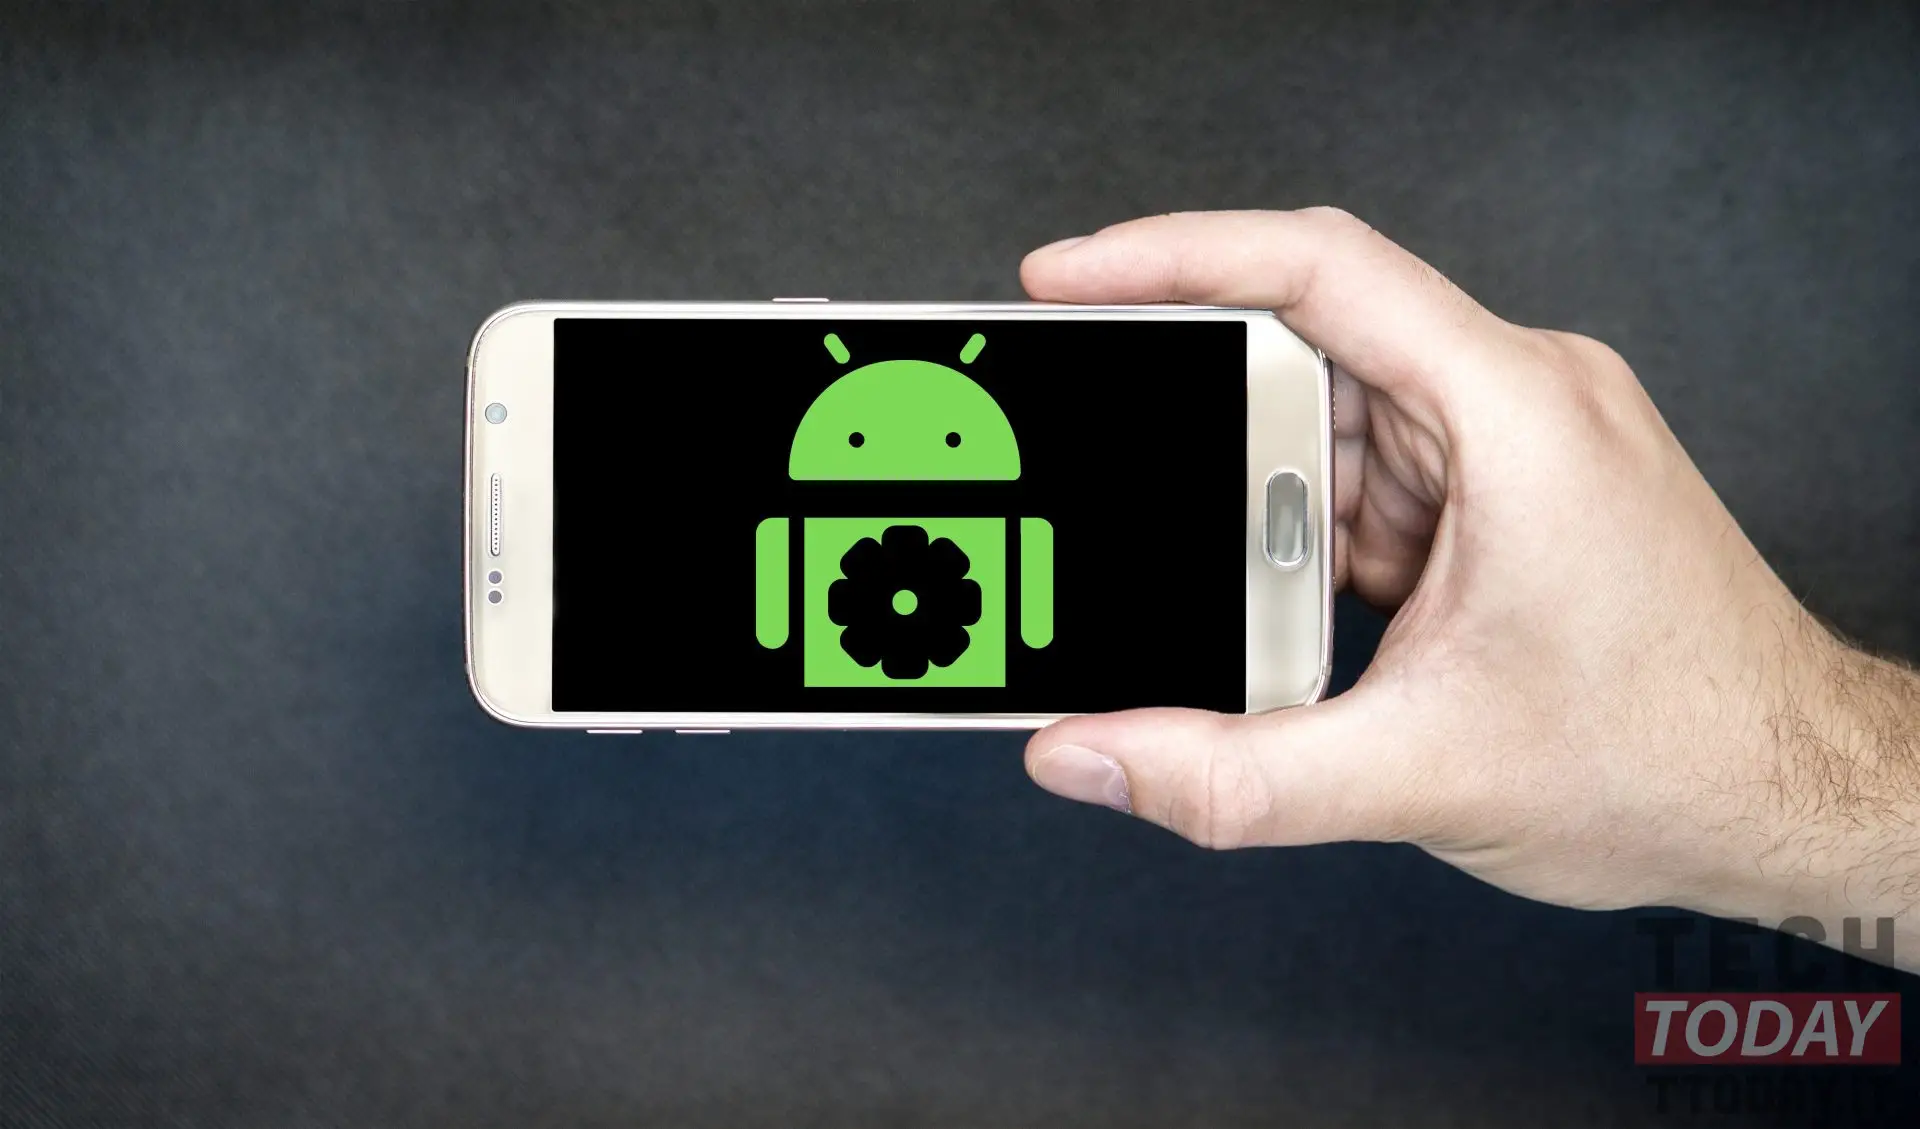 How to disable all sensors on Android smartphones